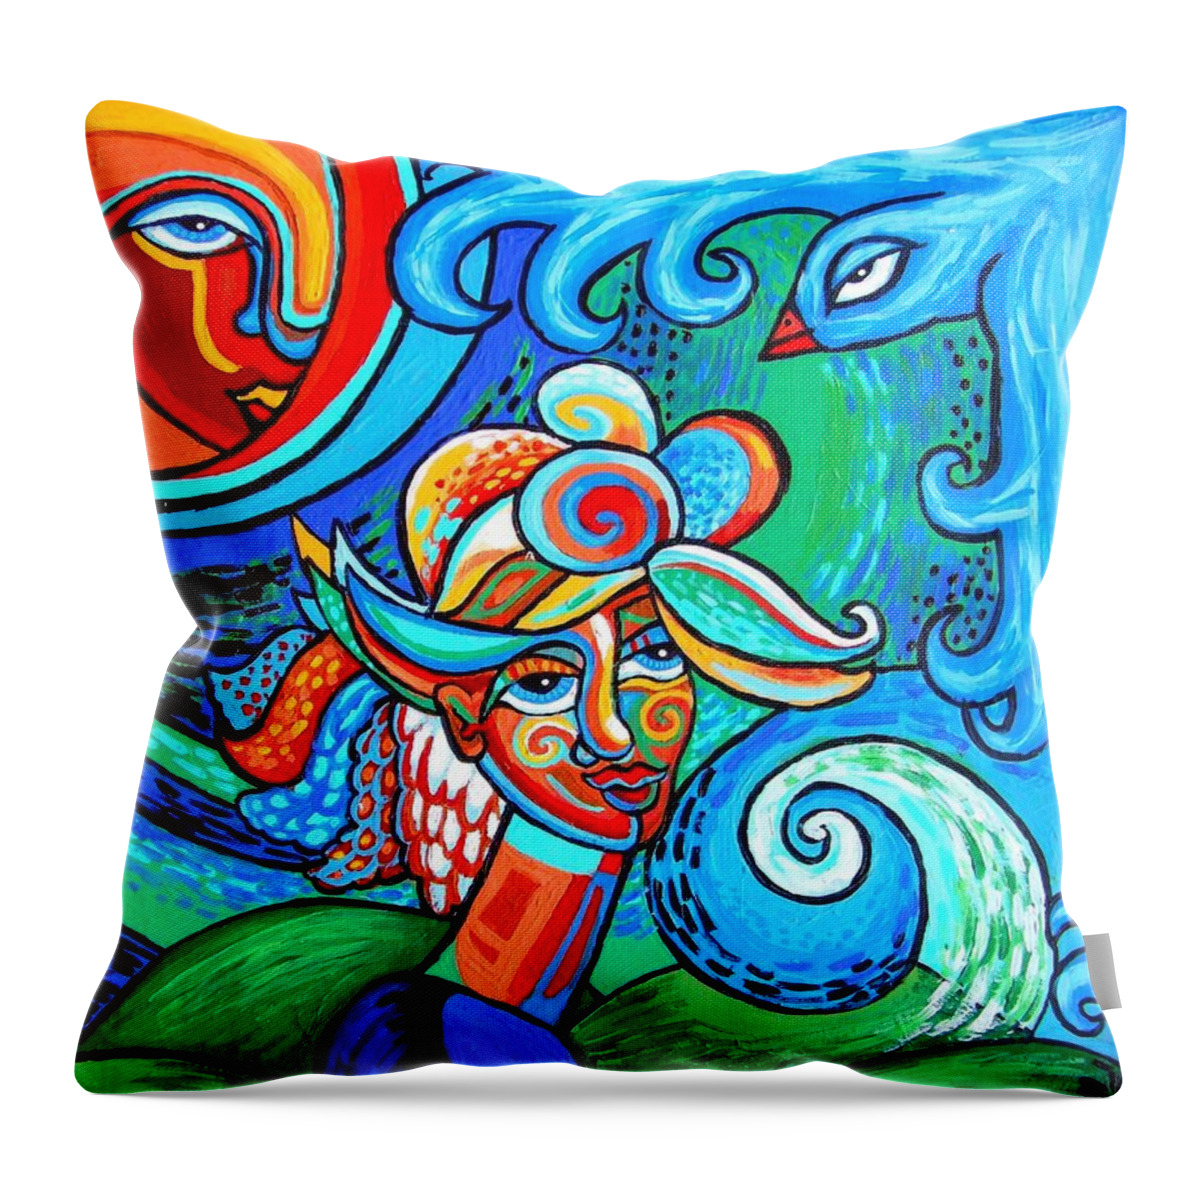 Woman Throw Pillow featuring the painting Spiral Bird Lady by Genevieve Esson